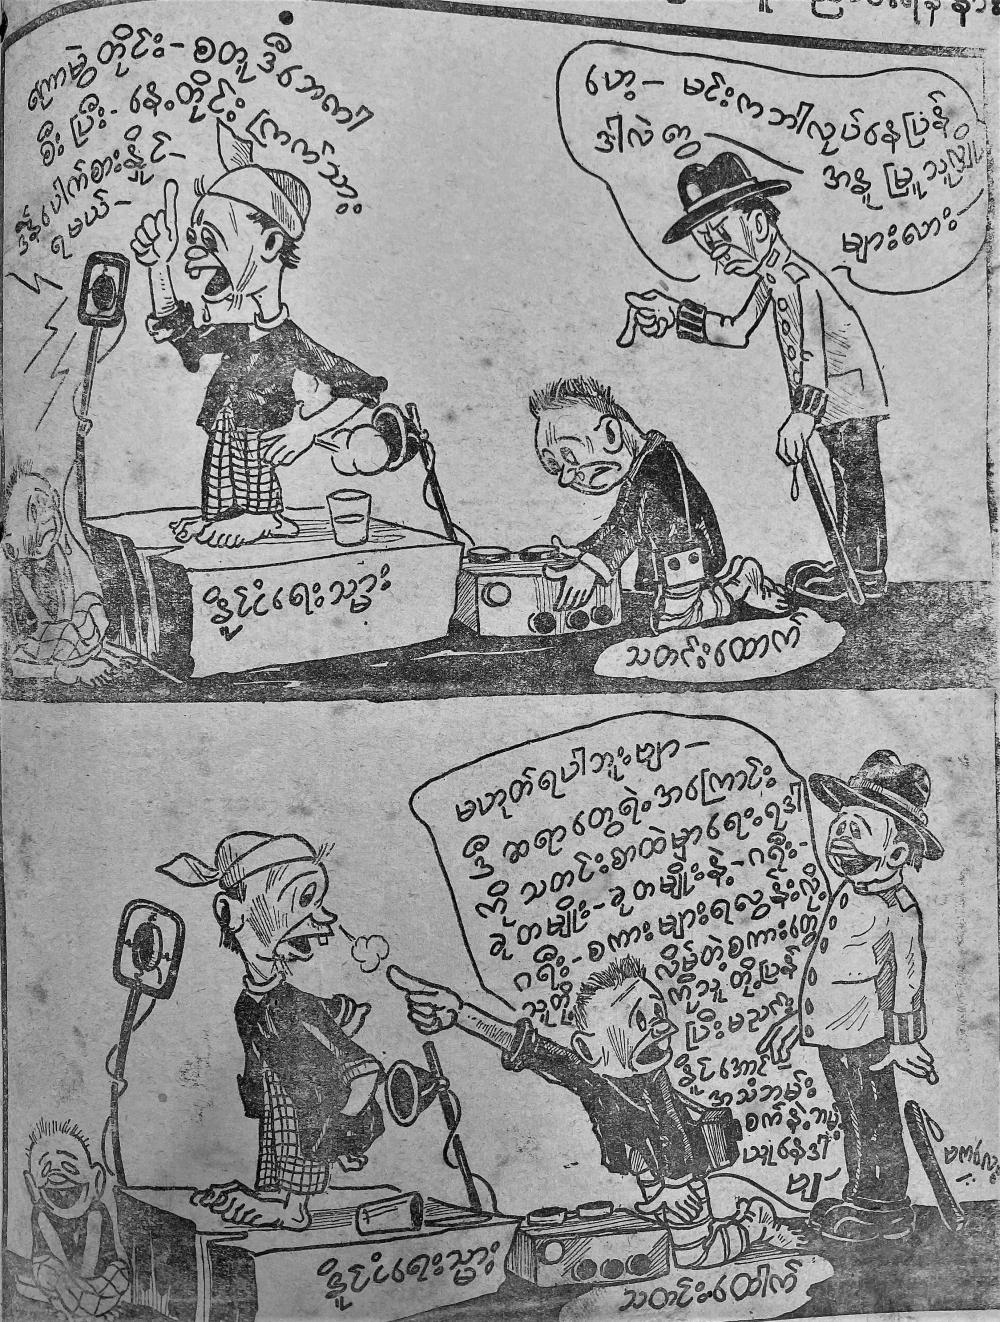  This cartoon published in The Rangoon Daily on April 27, 1951 depicts a journalist recording a speech of an apparently untrustworthy politician.